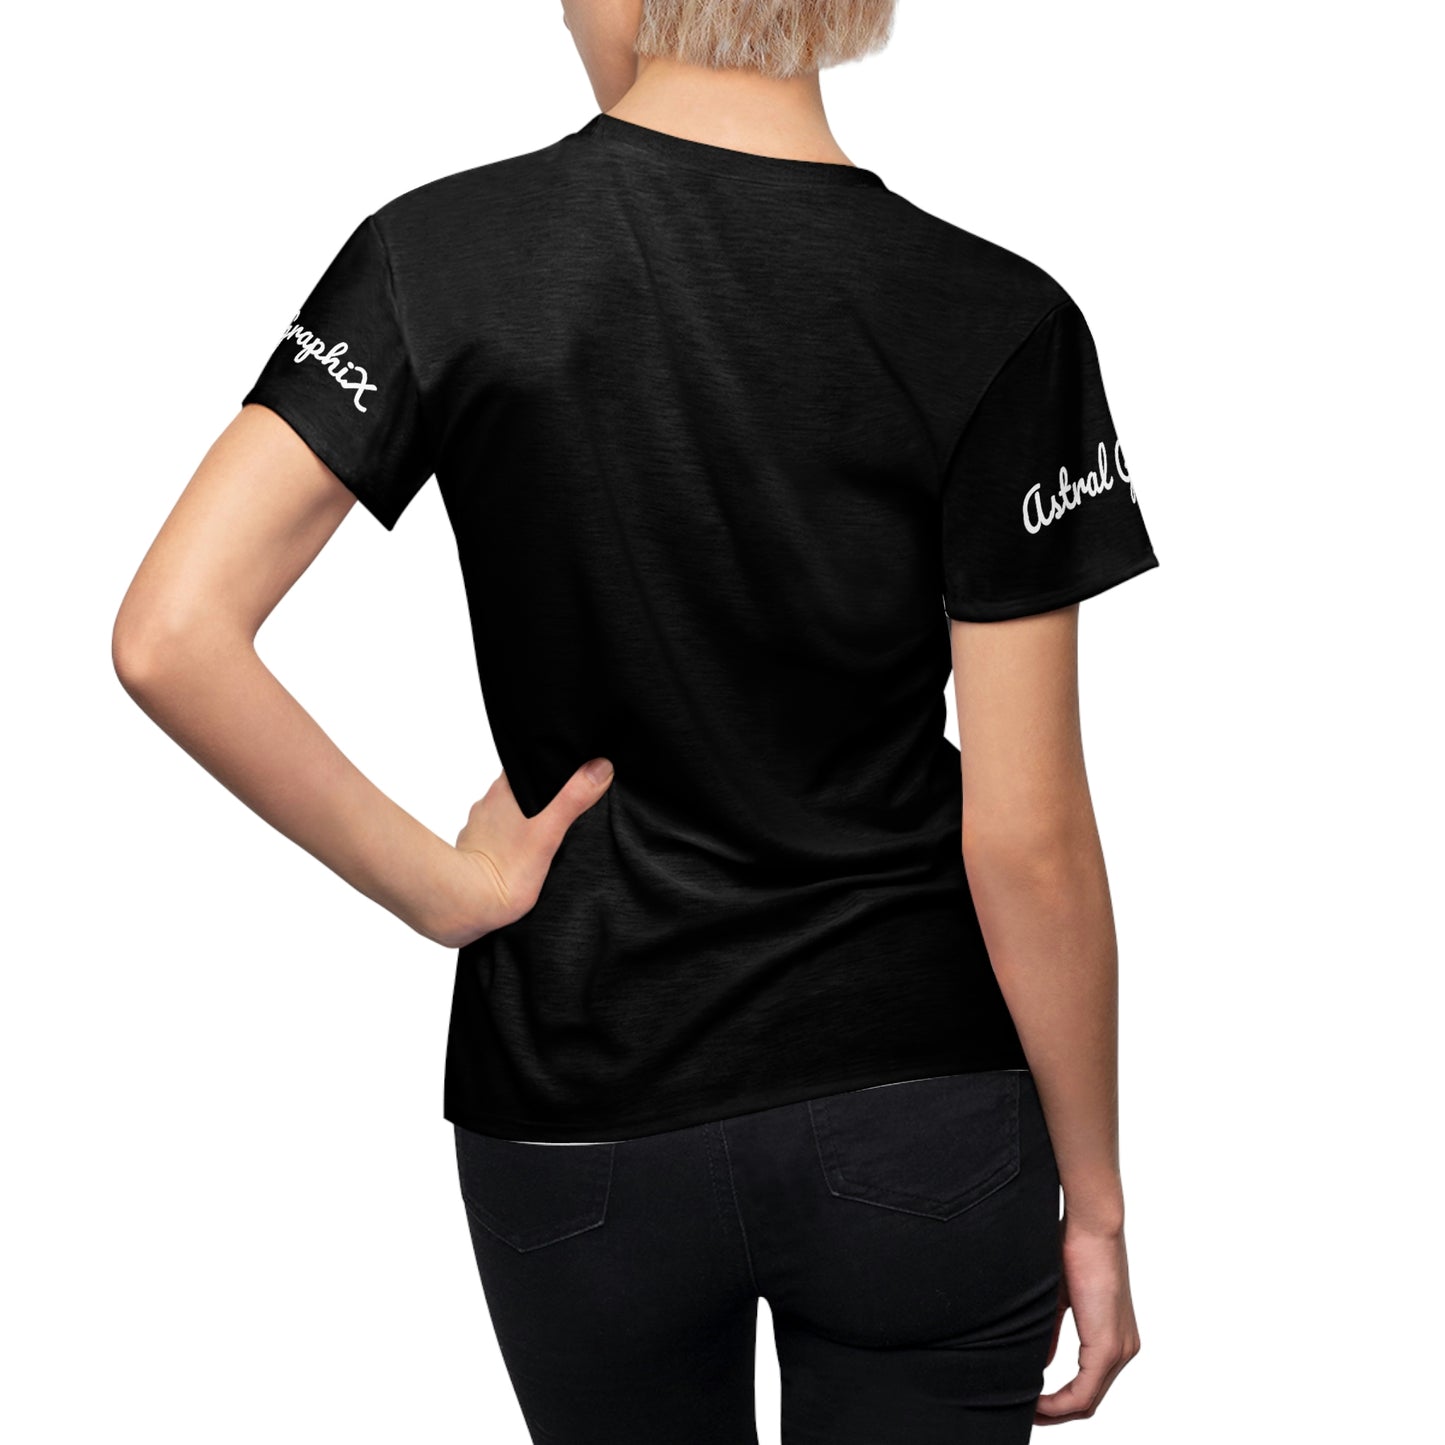 Word Art Collection - Women's Cut & Sew Tee (AOP) - Hope v2 in Black